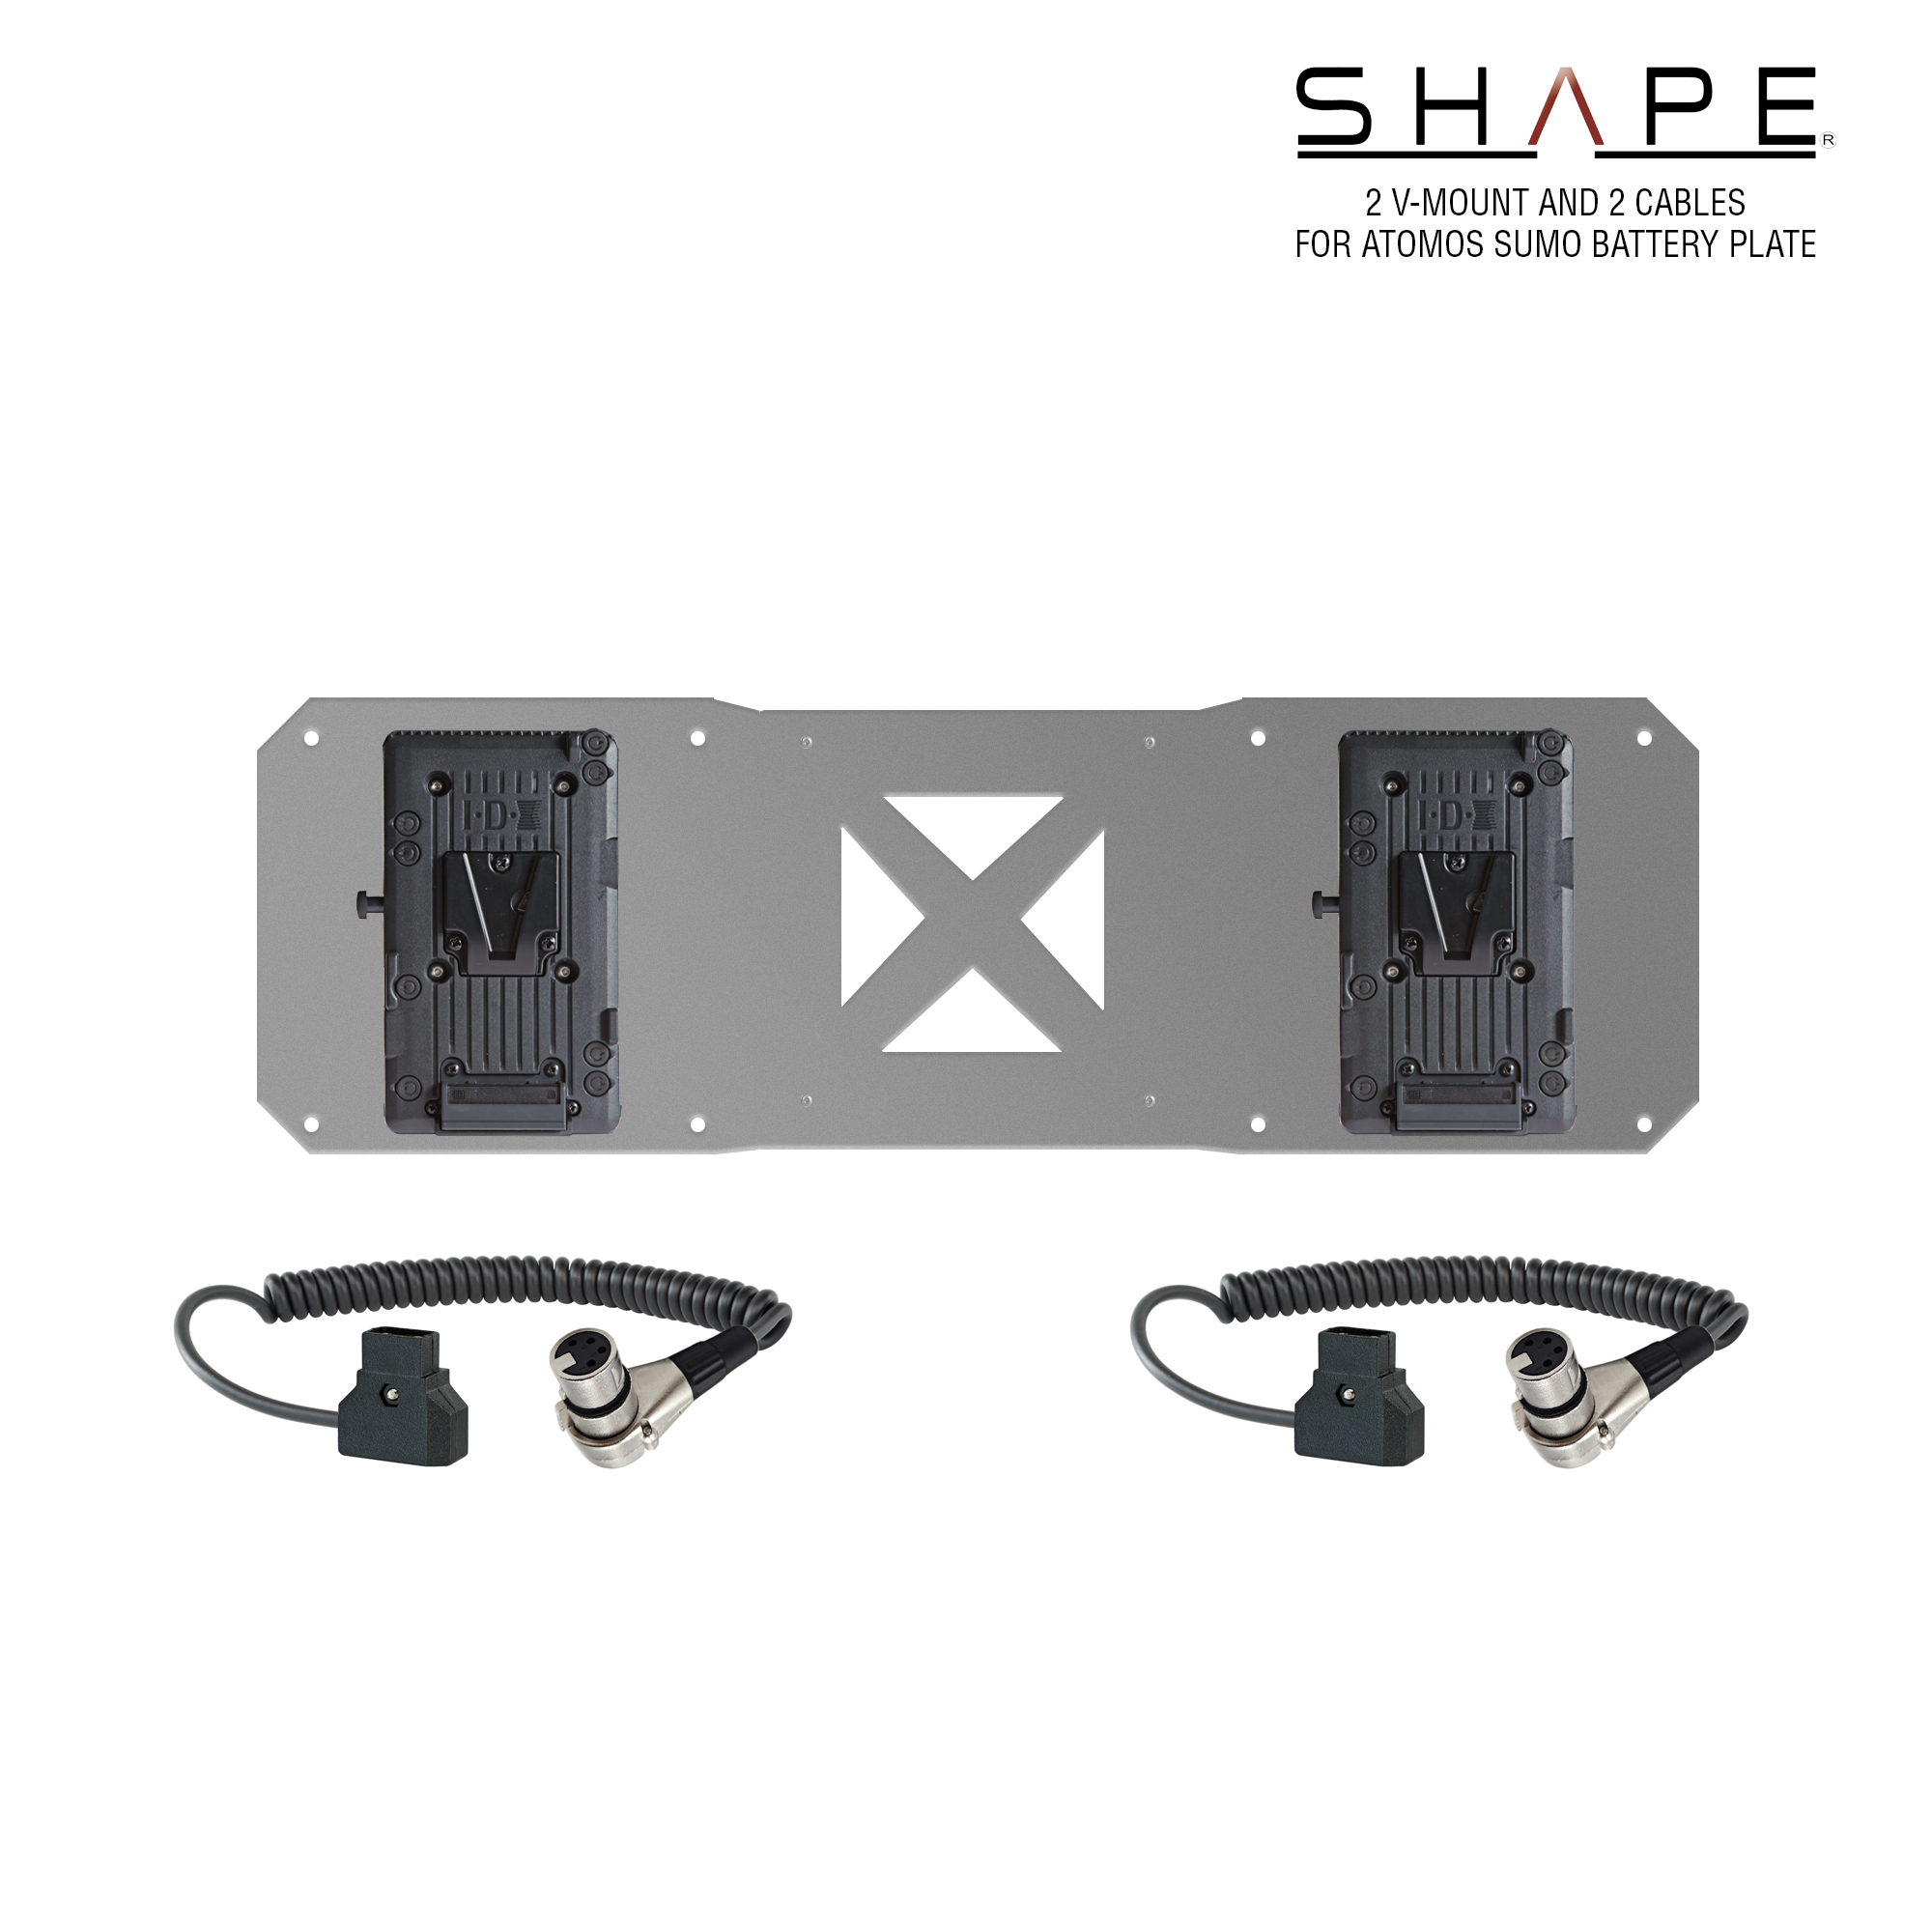 Shape V-MOUNT BATTERY PLATES AND CABLE KIT FOR ATO